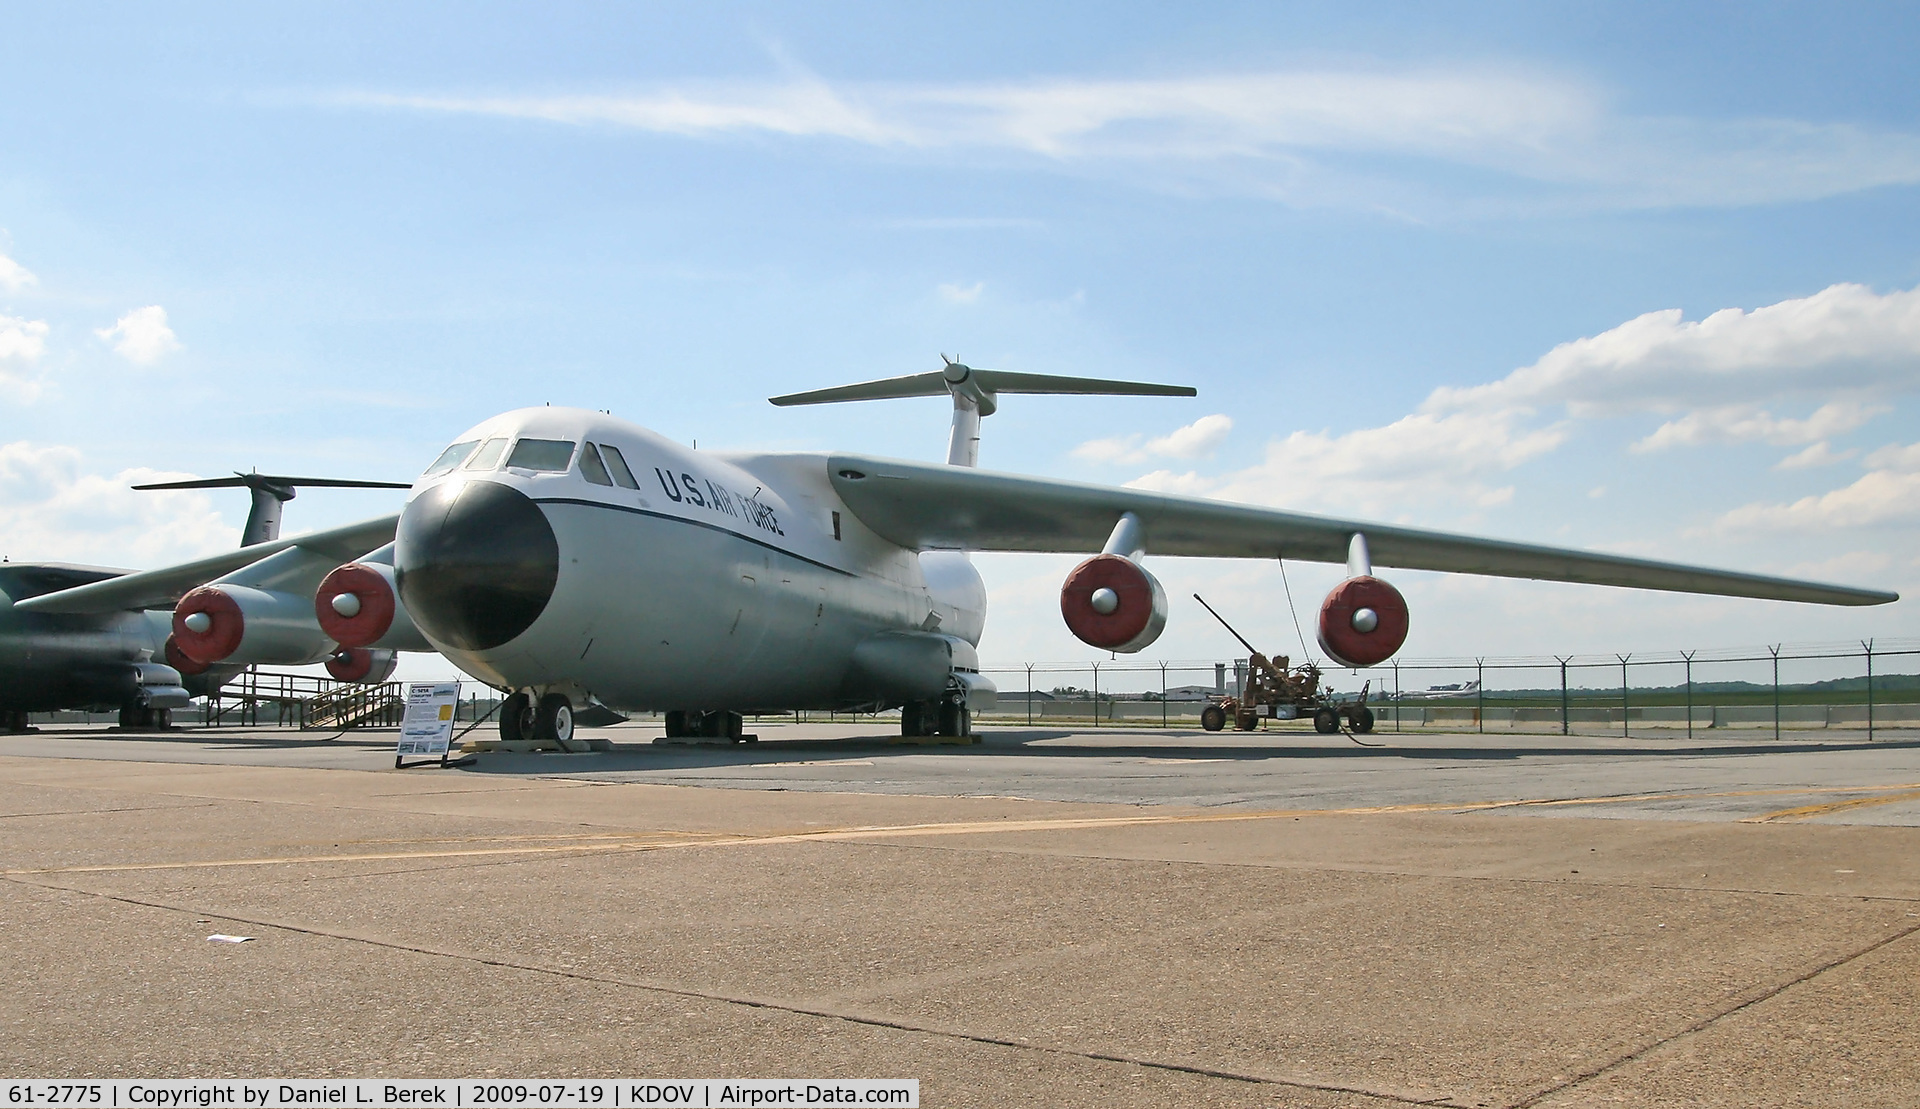 61-2775, 1963 Lockheed NC-141A Starlifter C/N 300-6001, This beauty is preserved at the Air Mobility Command Museum, Dover, DE.